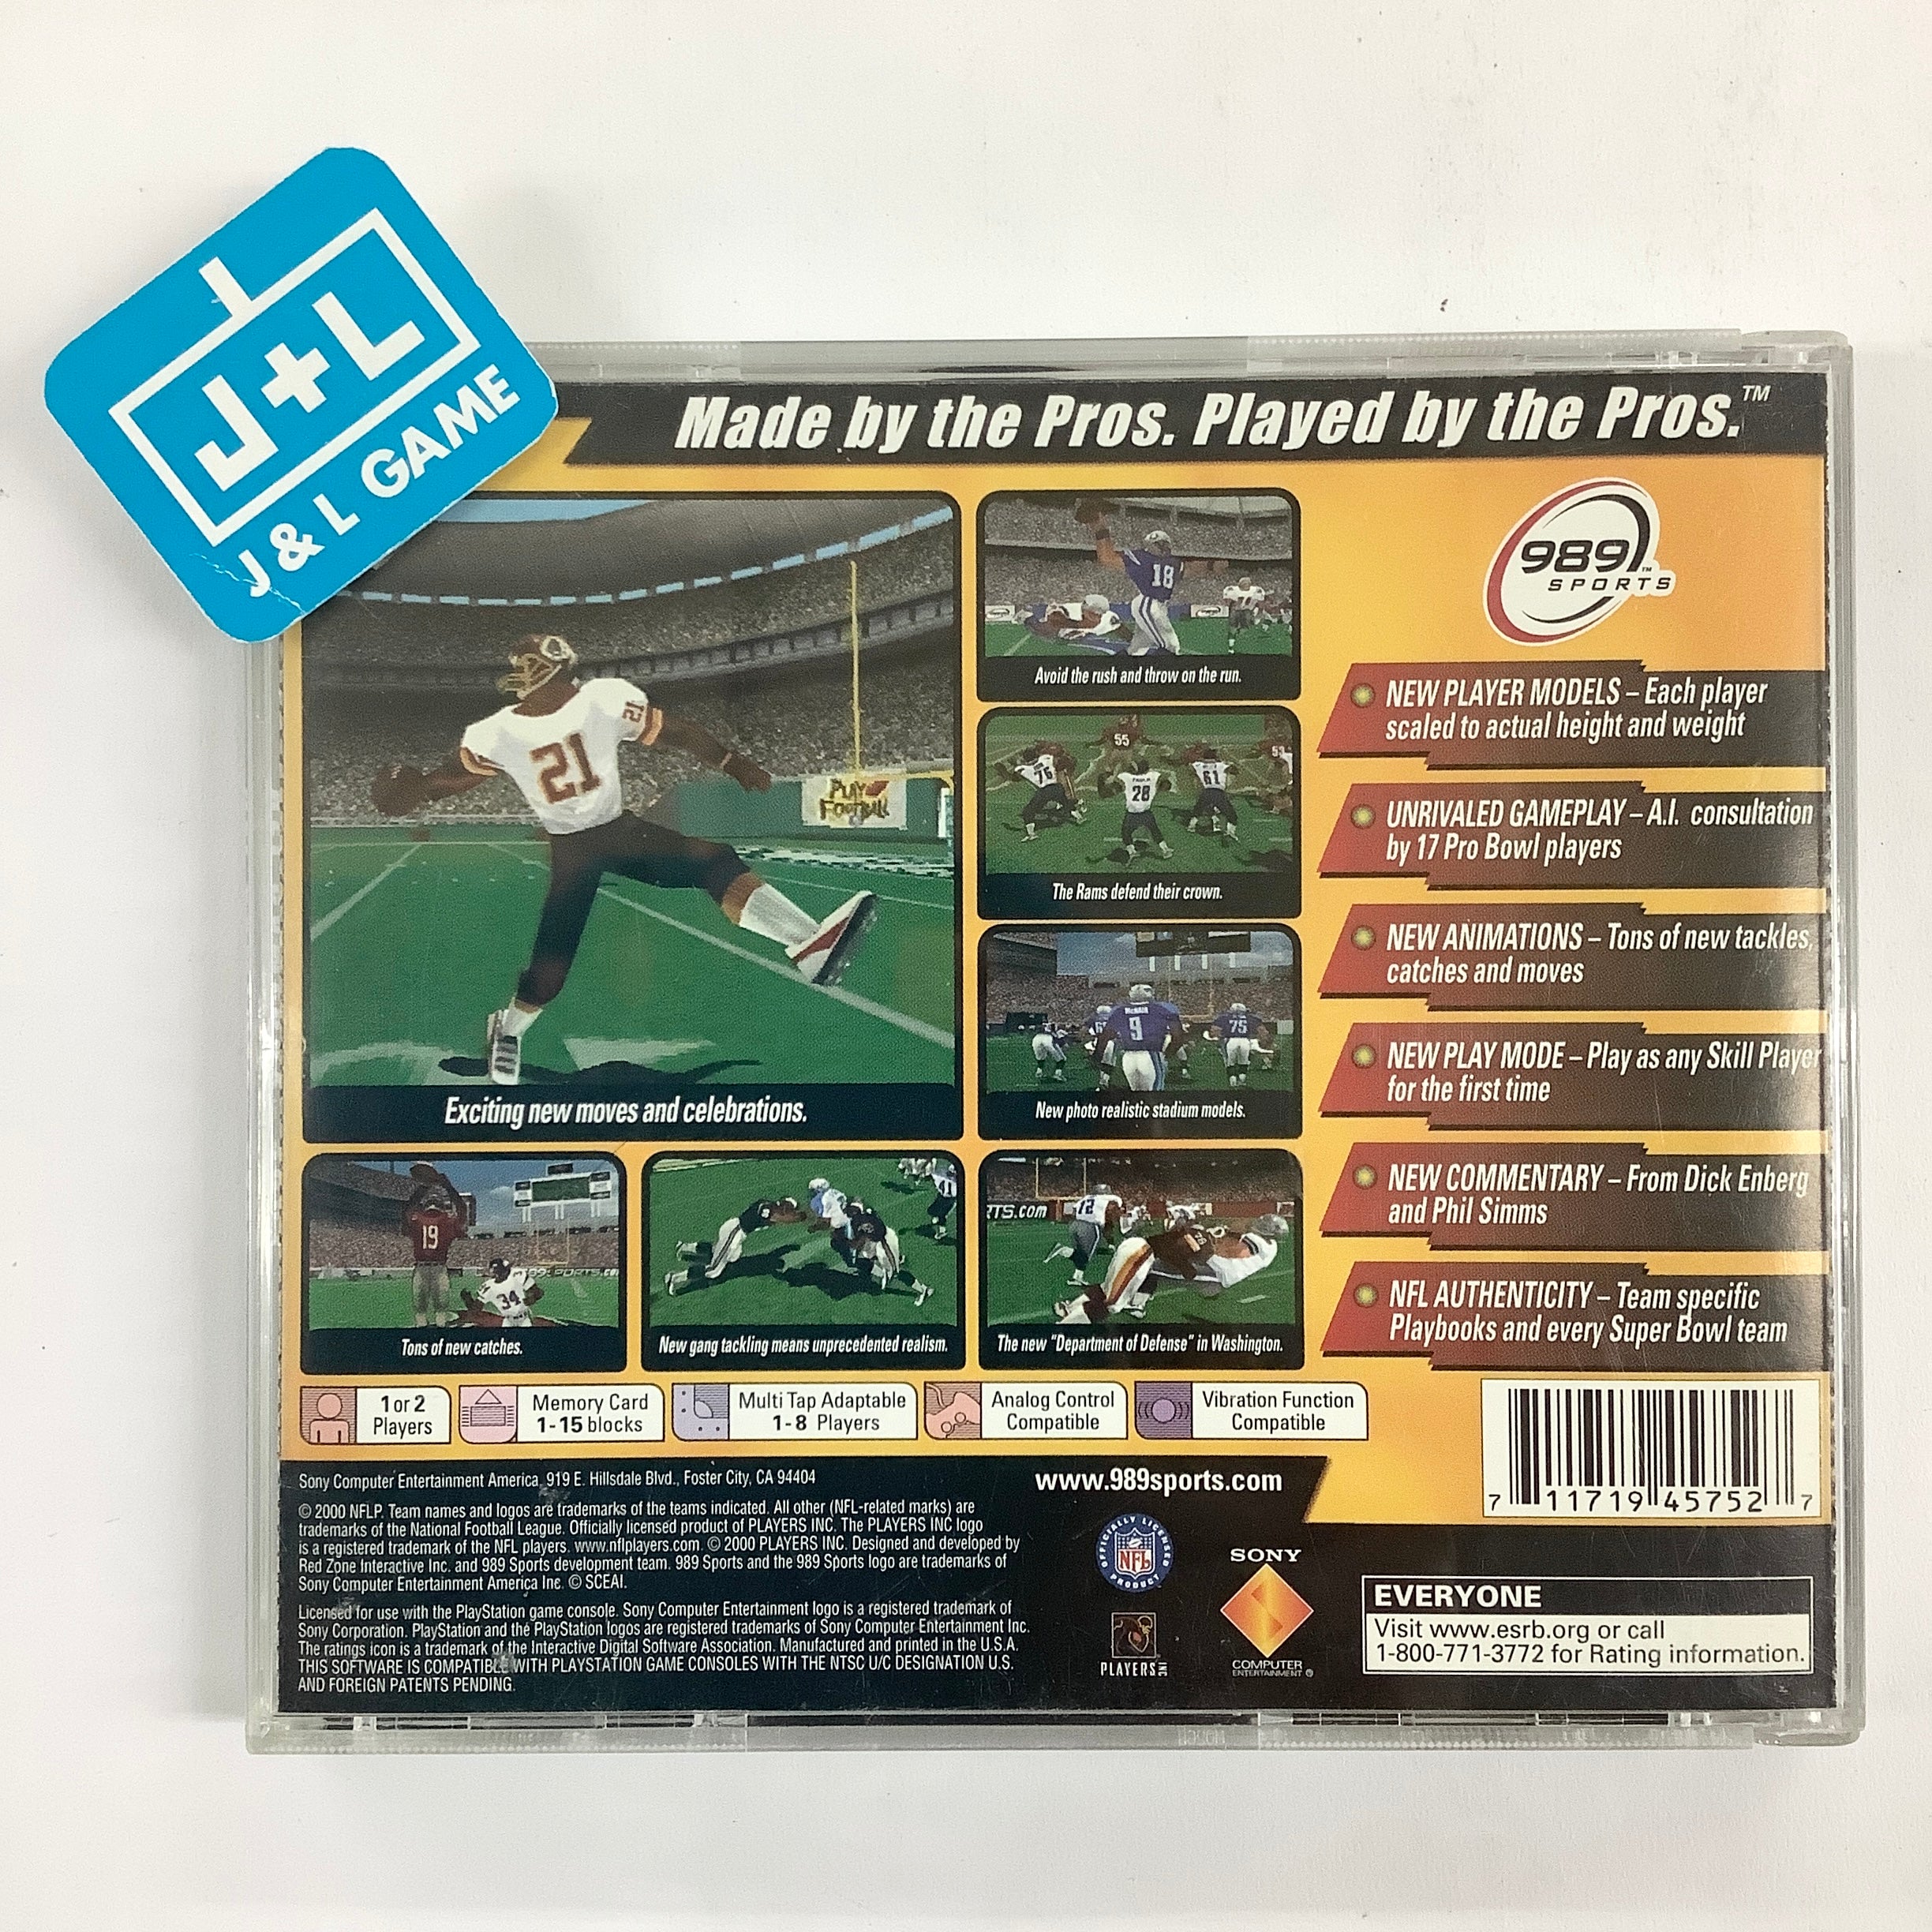 NFL GameDay 2001 - (PS1) PlayStation 1 [Pre-Owned] Video Games SCEA   